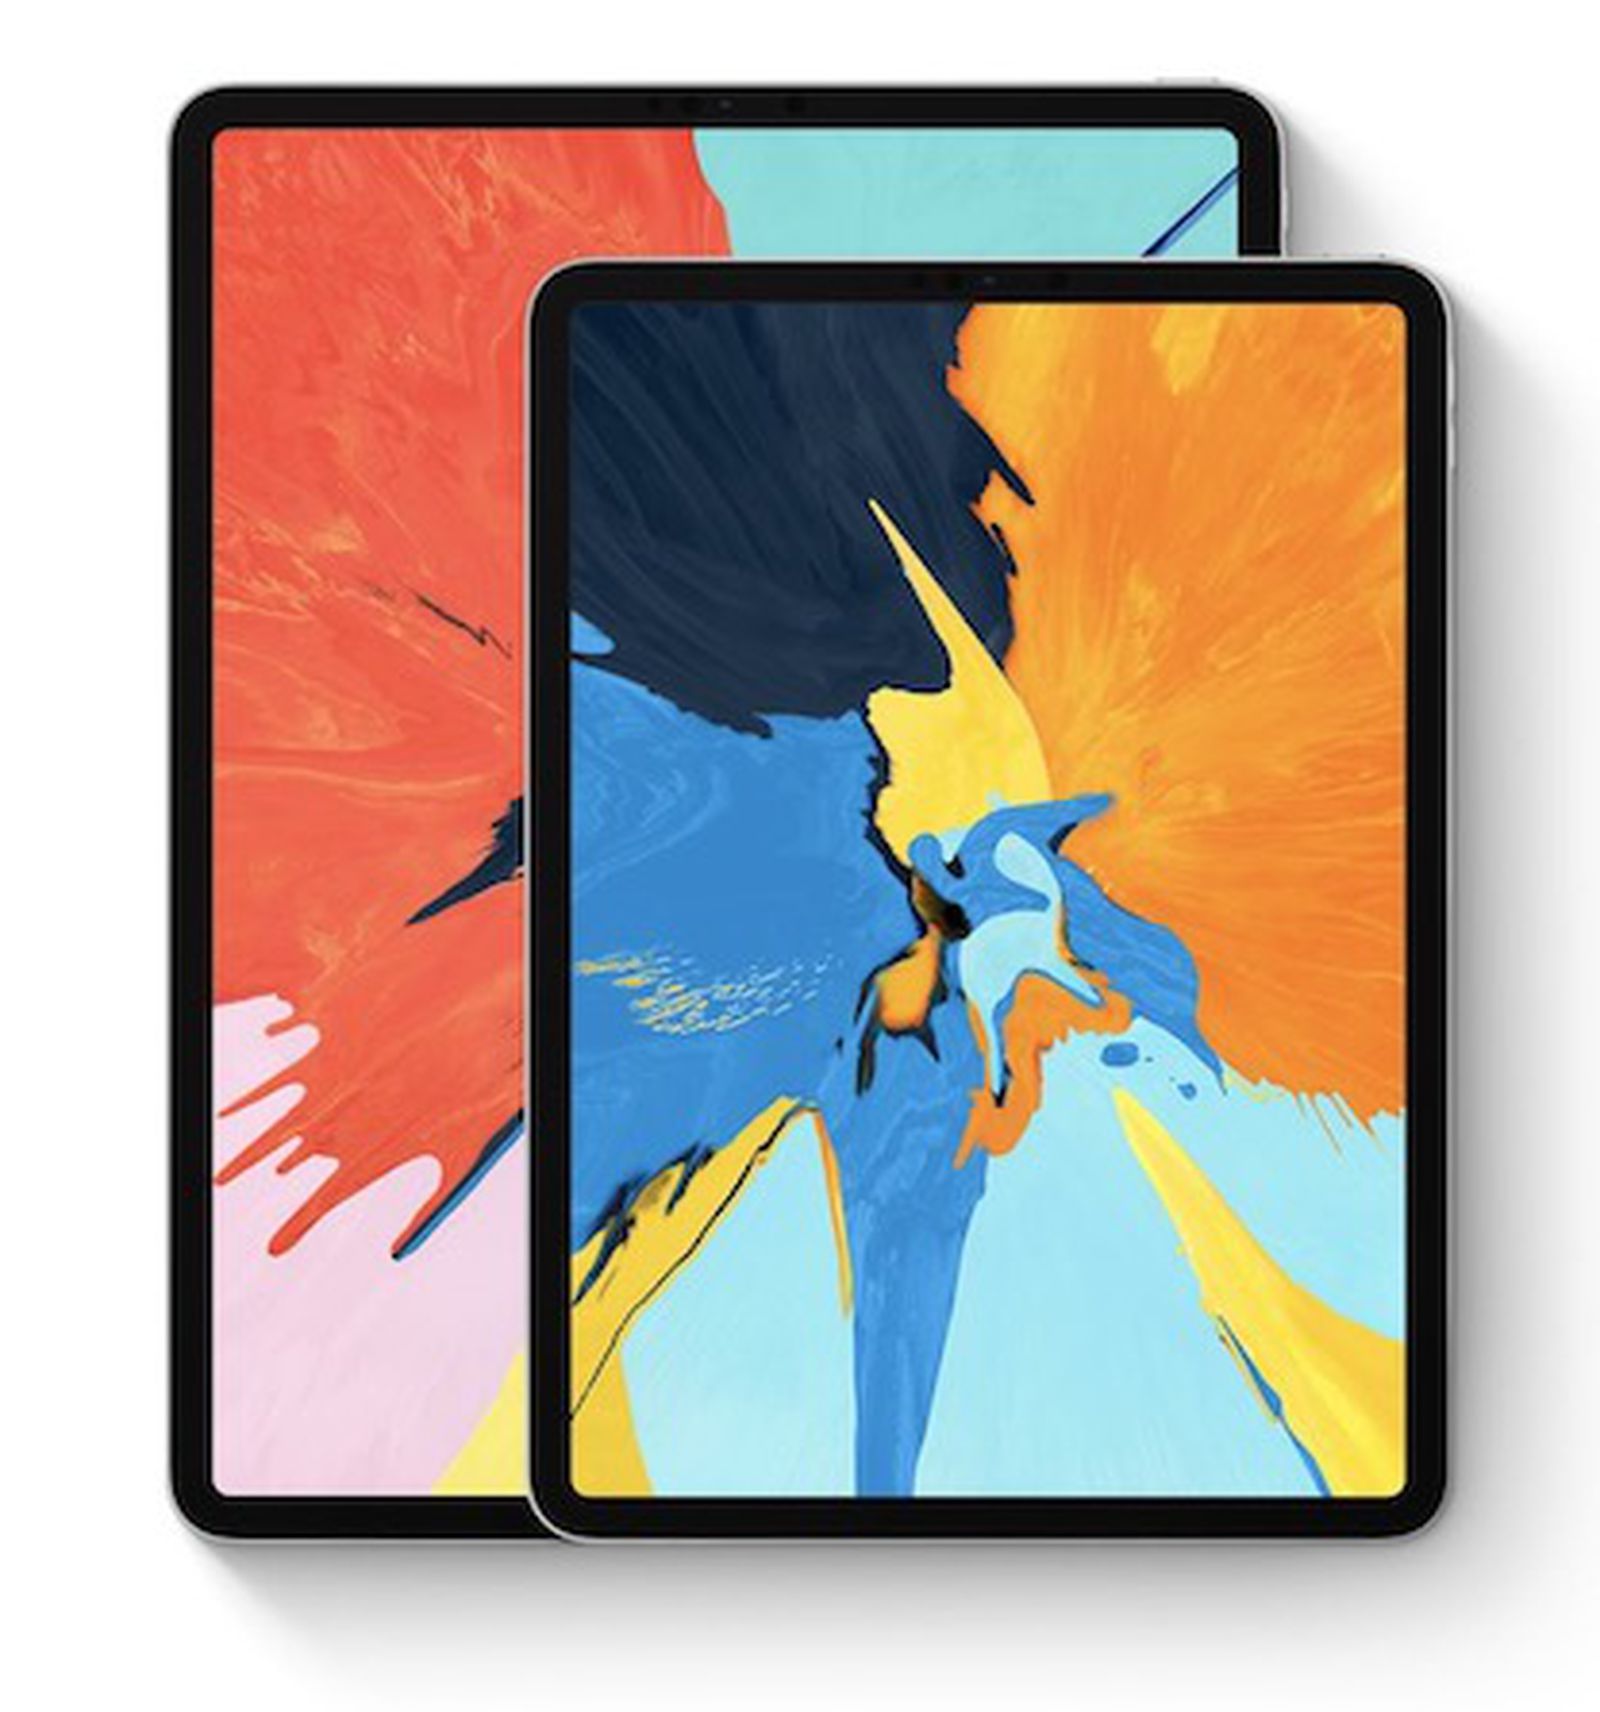 Ipad Pro Time To Buy Reviews Issues More